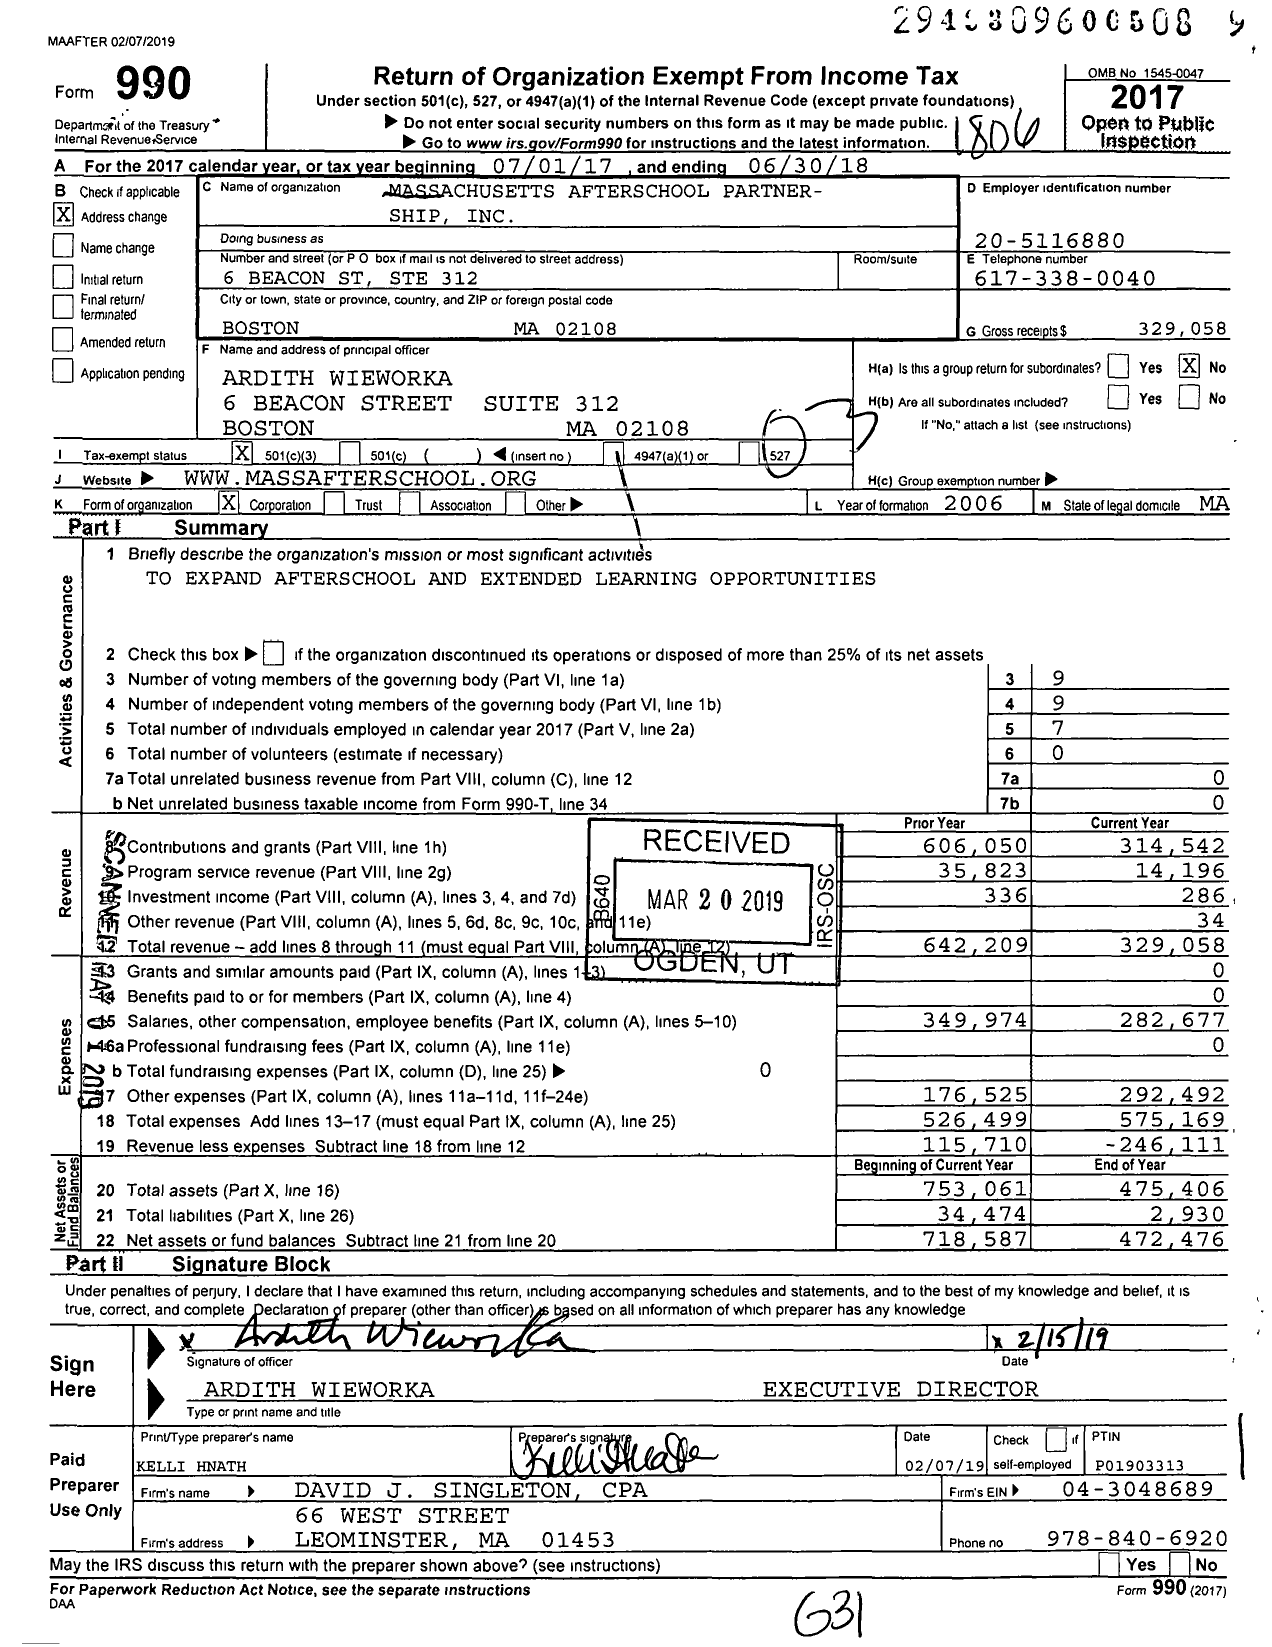 Image of first page of 2017 Form 990 for Massachusetts Afterschool Partner- Ship